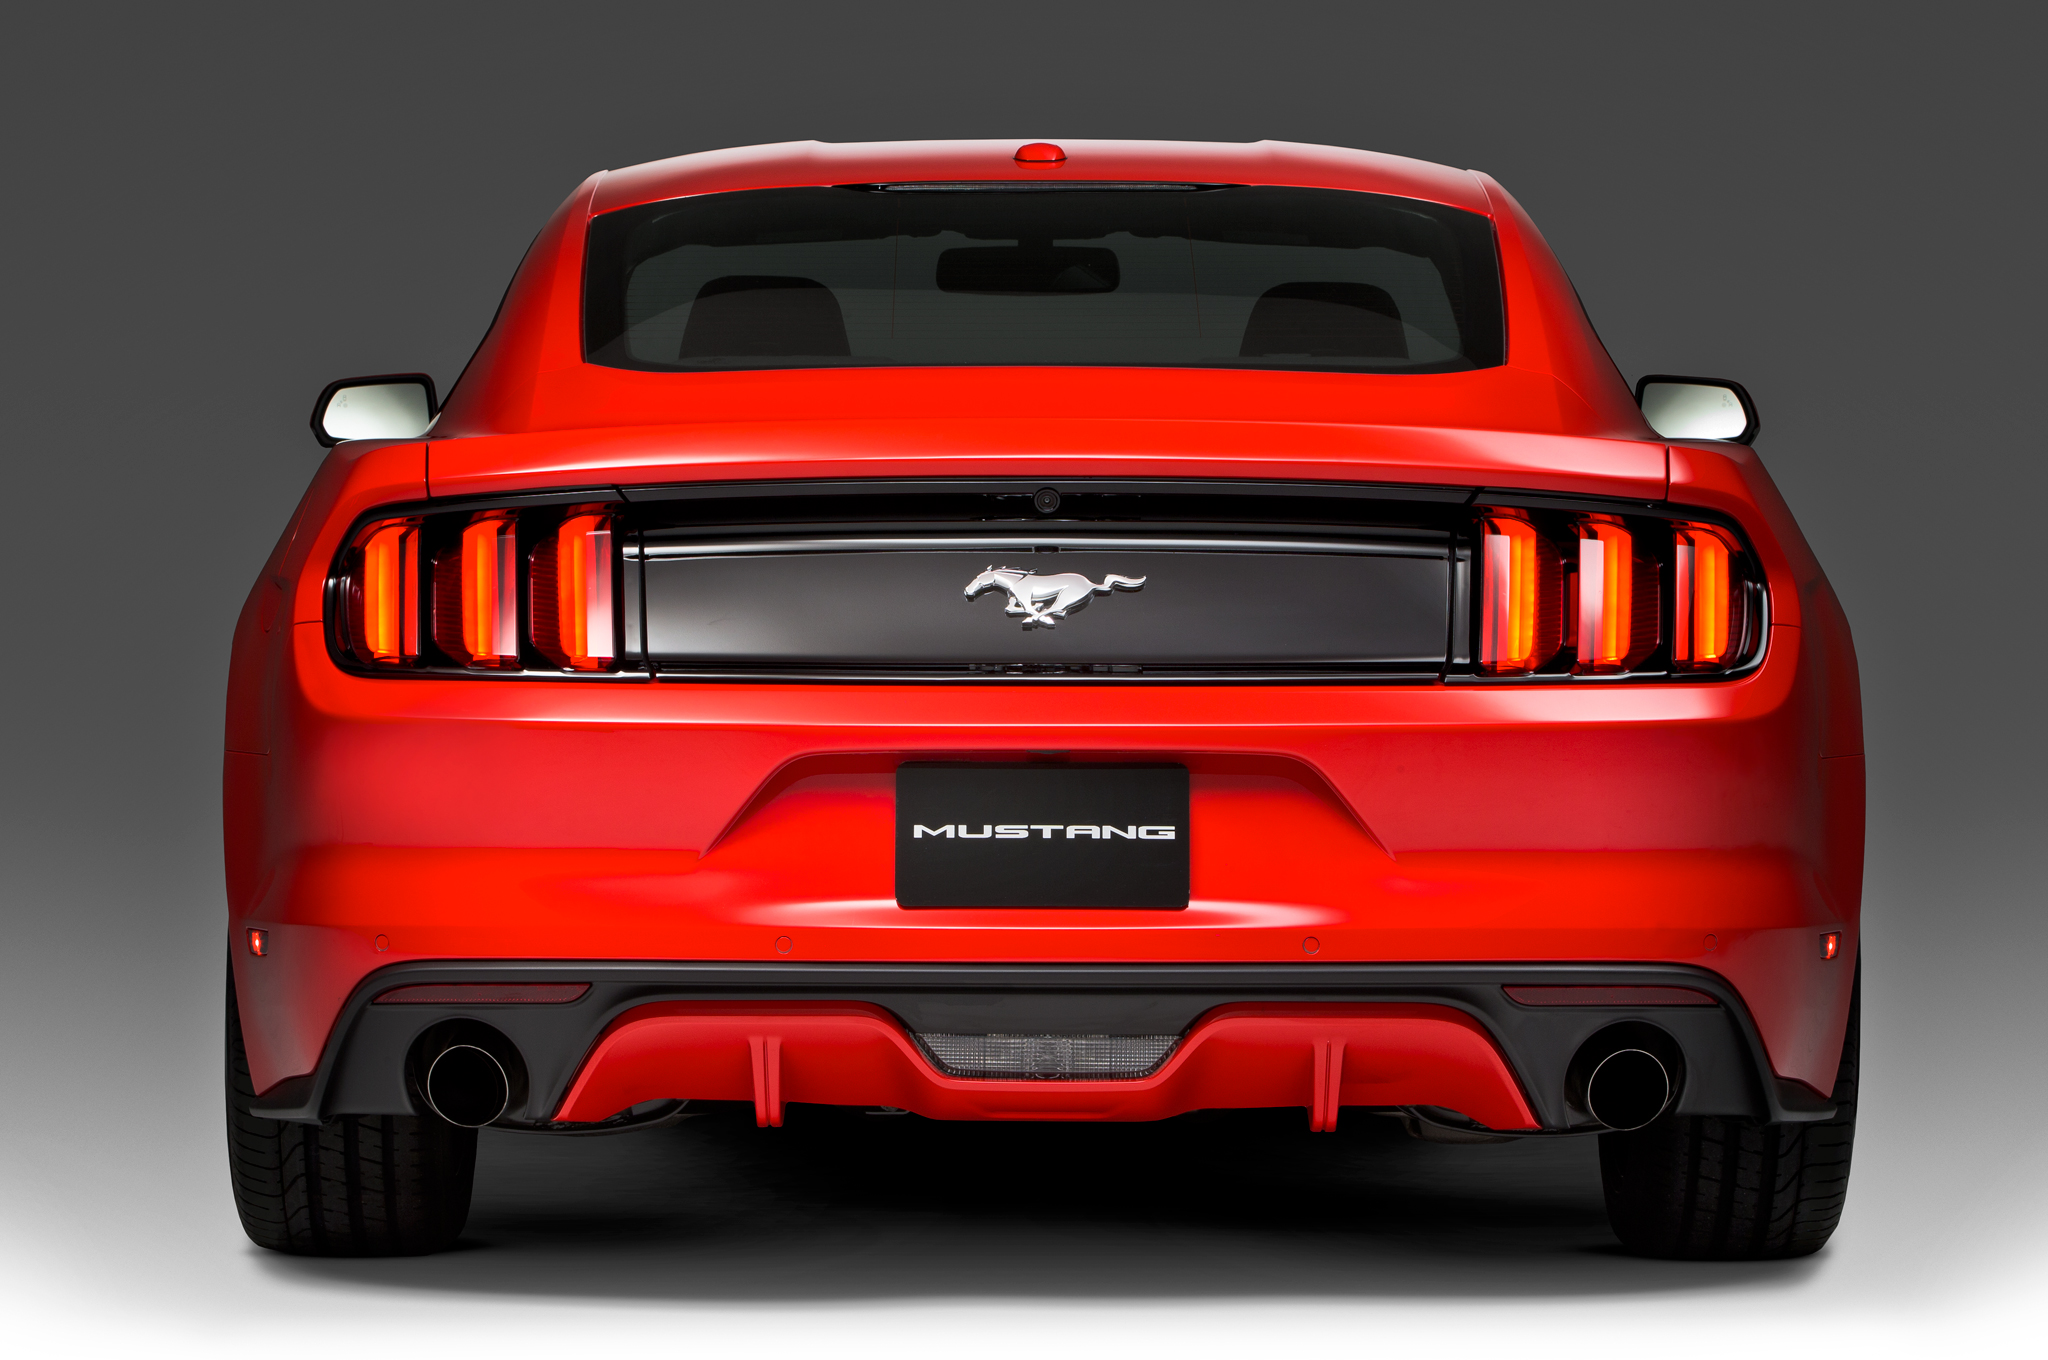 2015 Ford Mustang Backgrounds on Wallpapers Vista